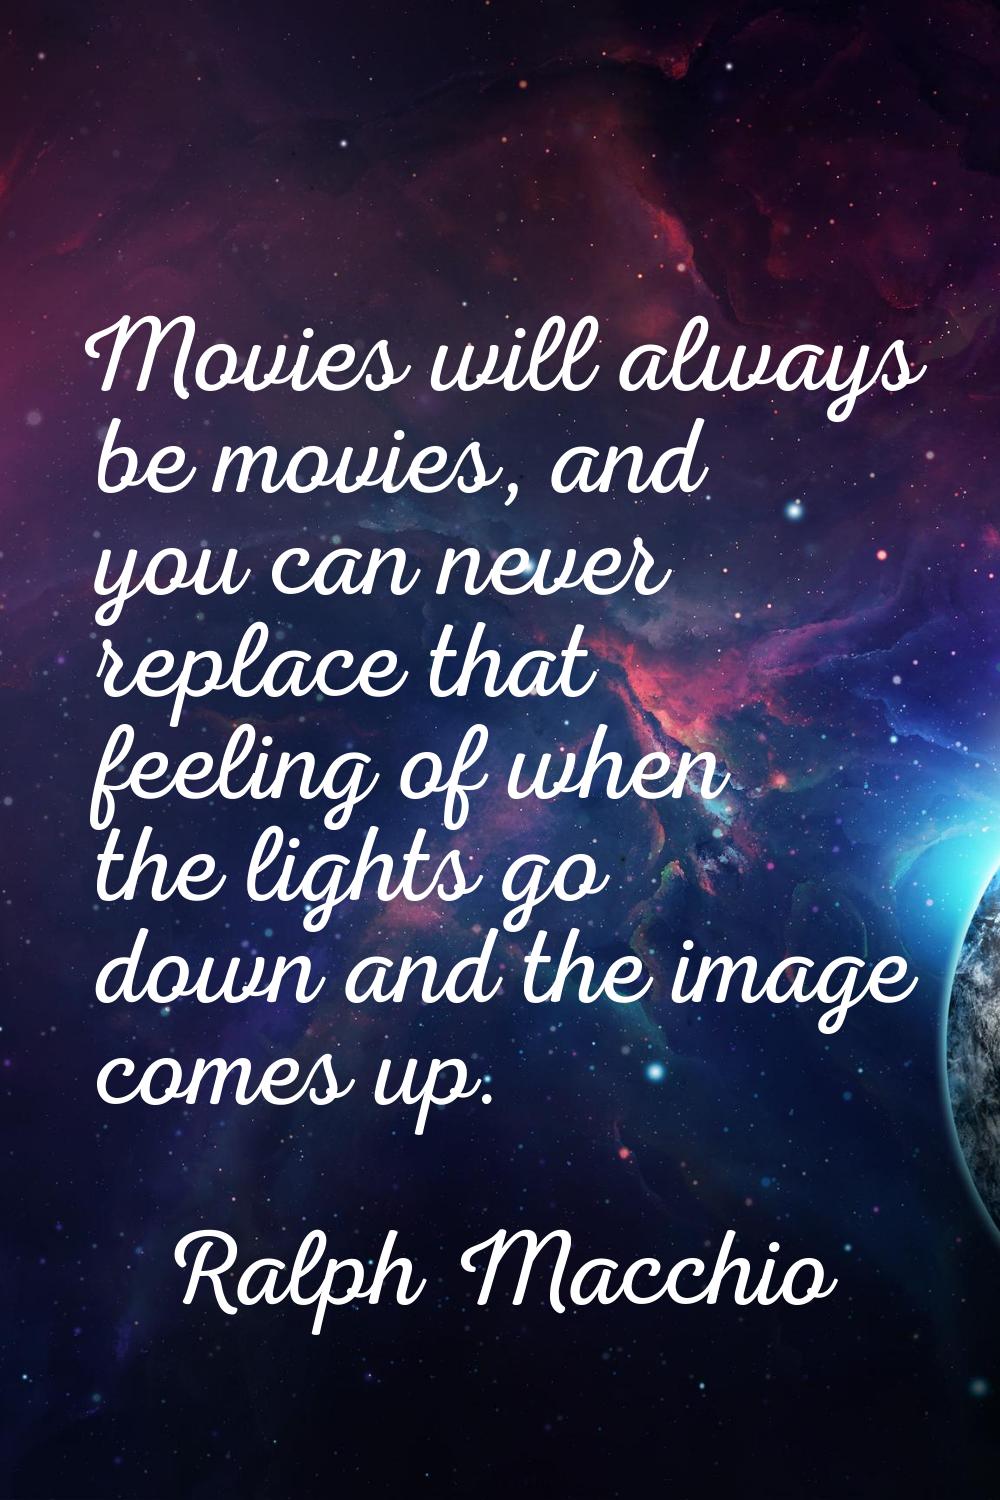 Movies will always be movies, and you can never replace that feeling of when the lights go down and